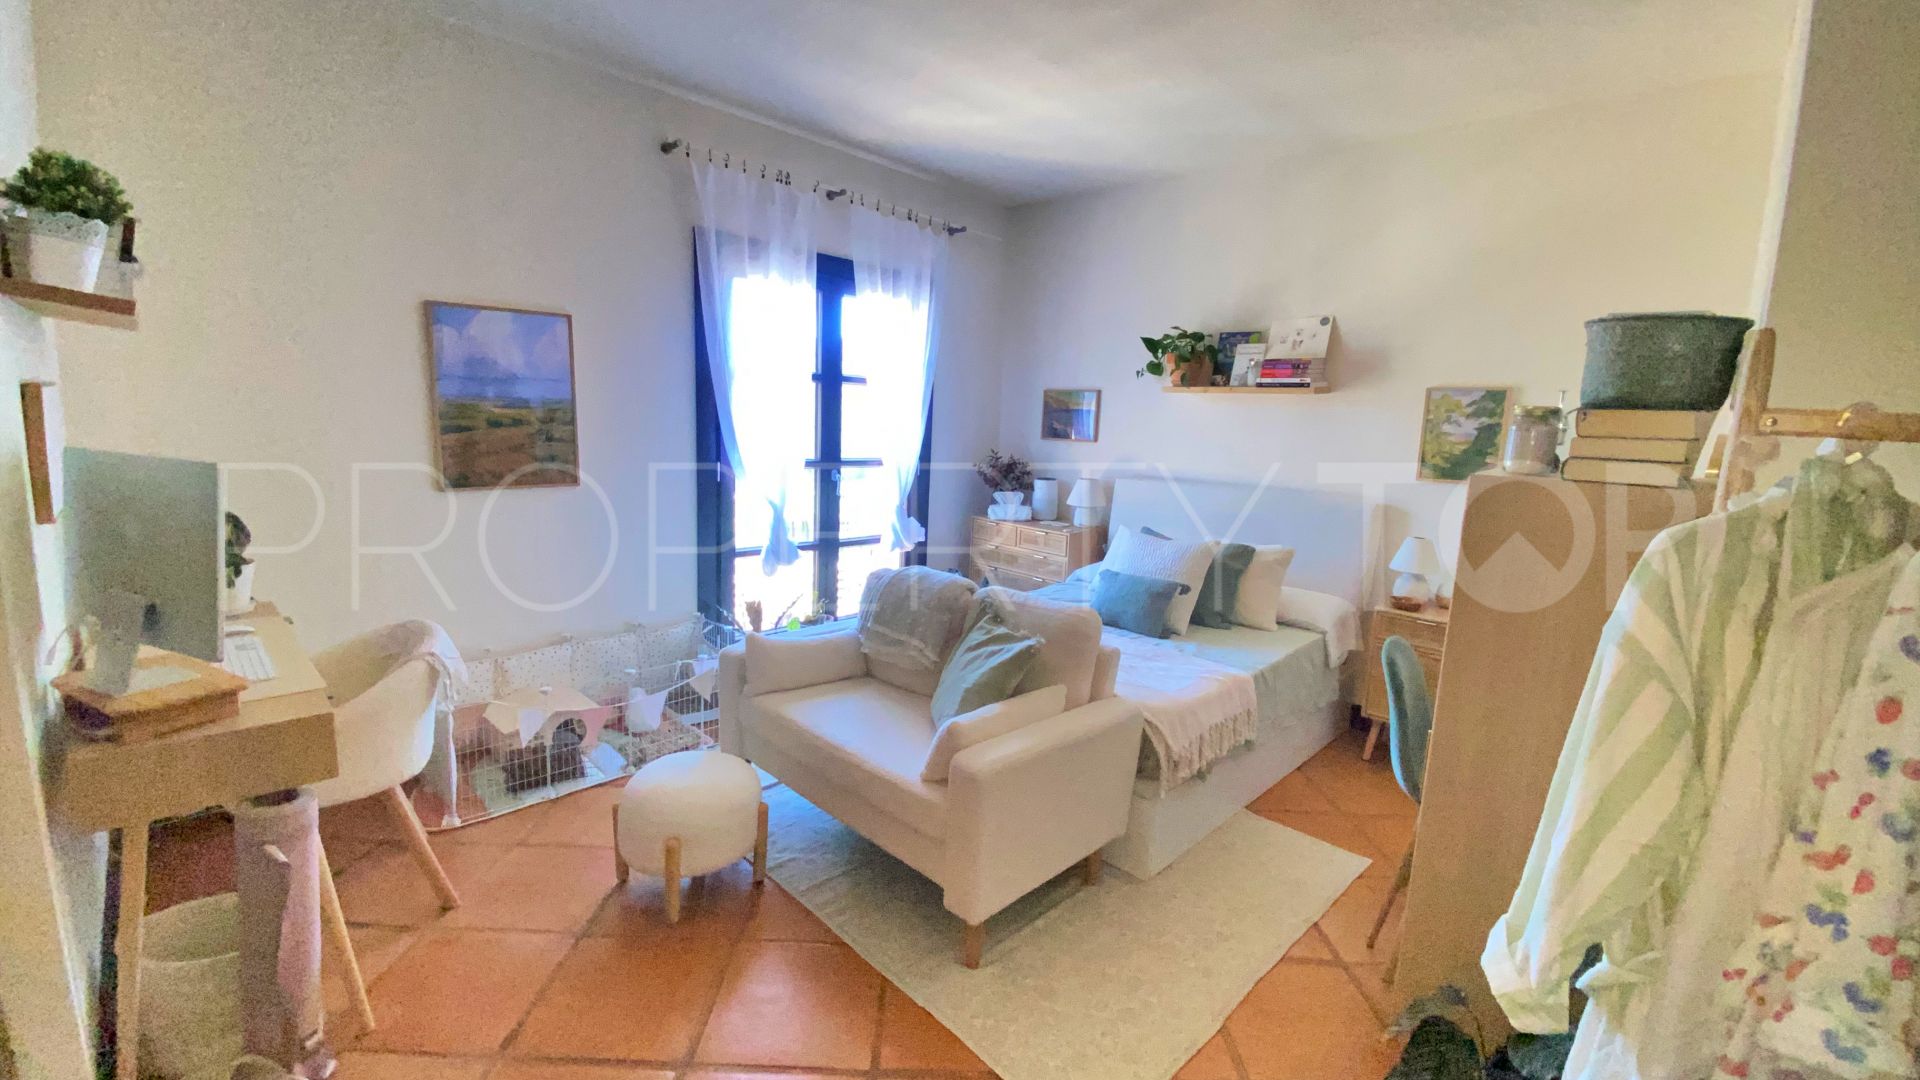 For sale El Casar semi detached house with 4 bedrooms